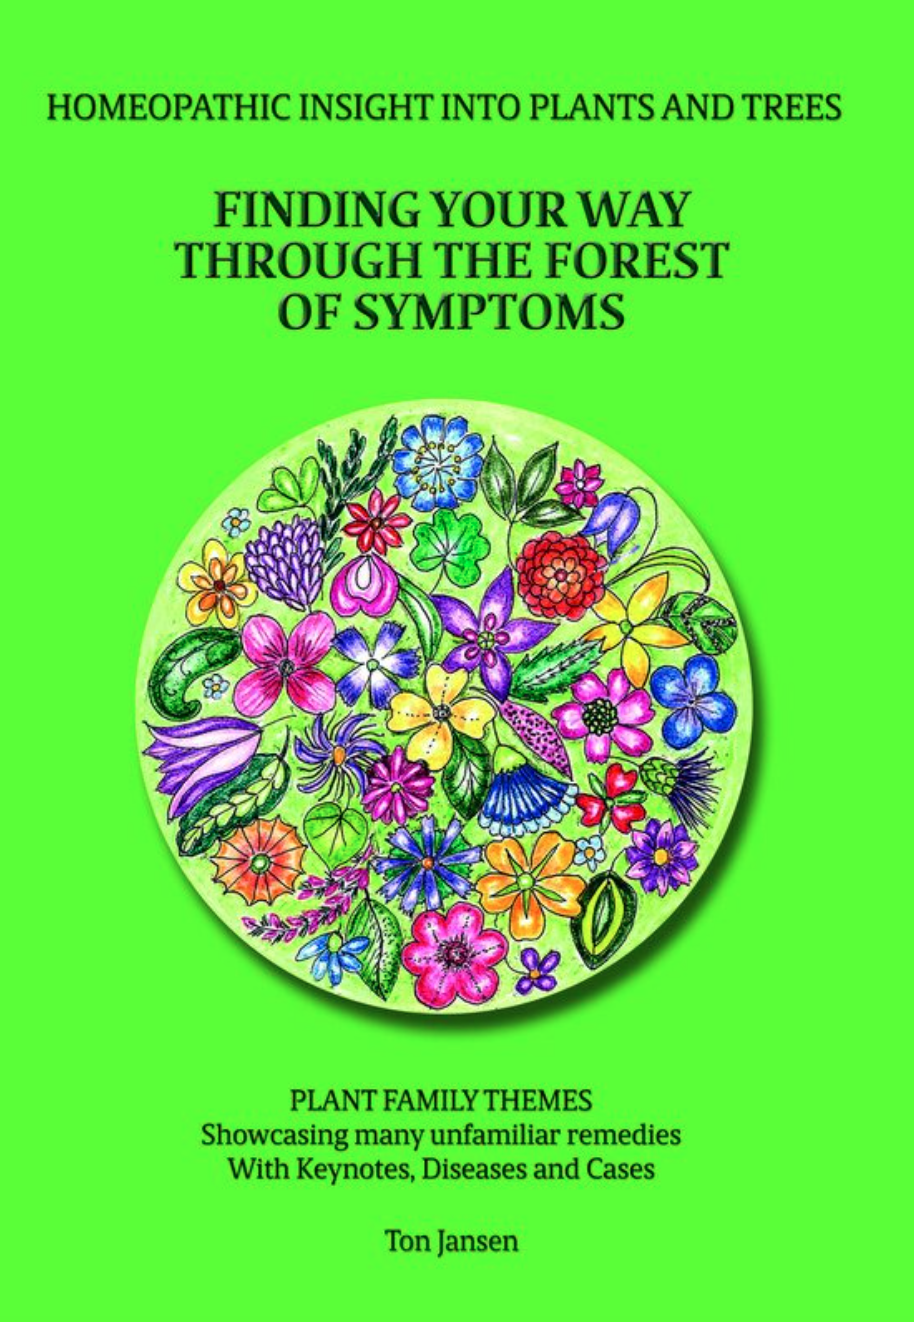 Homeopathic insight into plants and trees: Finding your way through the forest of symptoms (Ton Jansen)